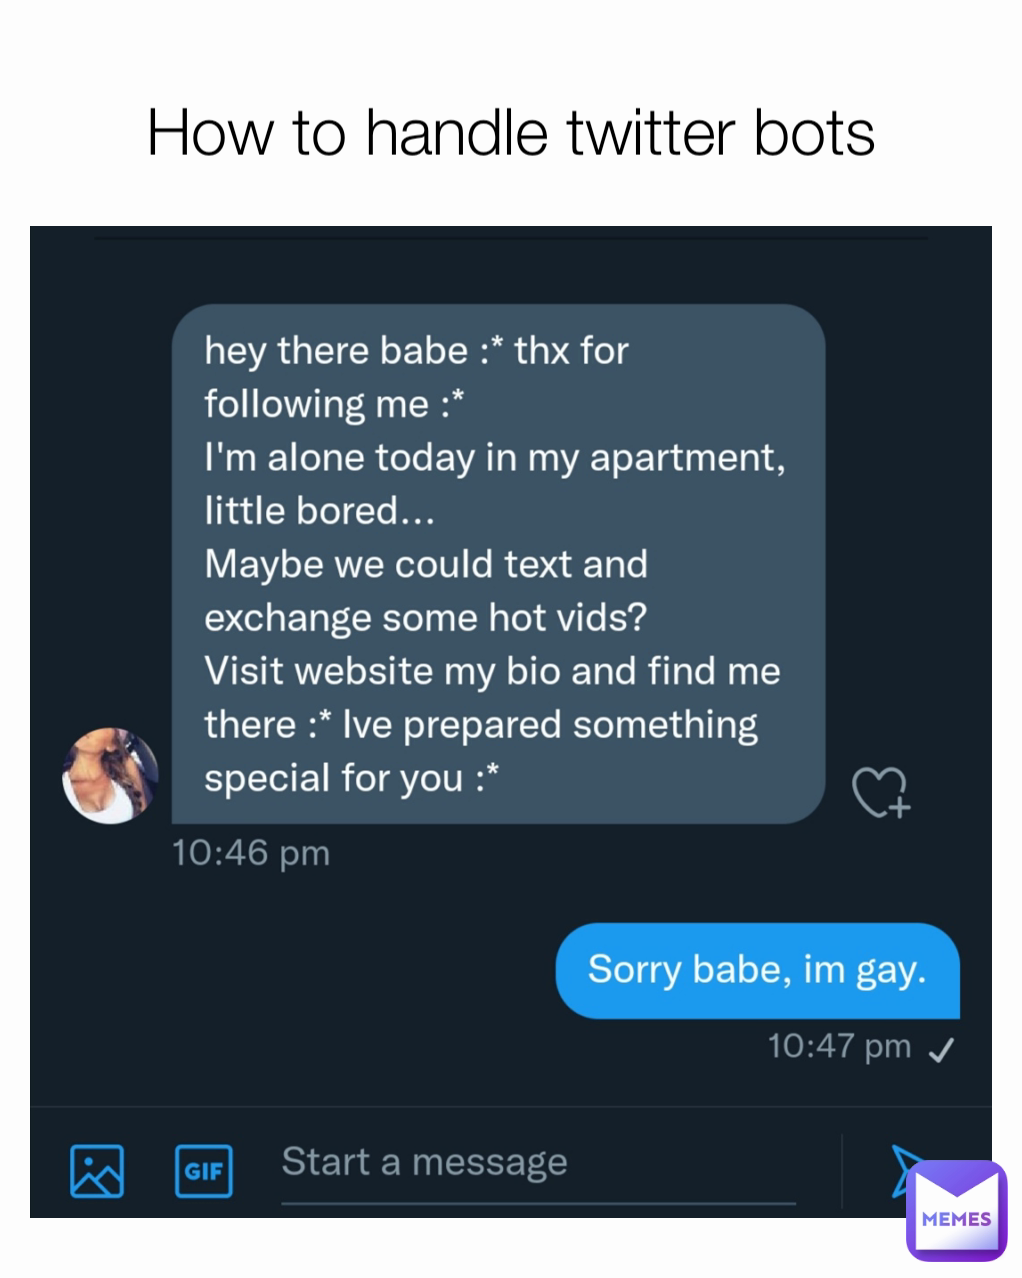 How to handle twitter bots